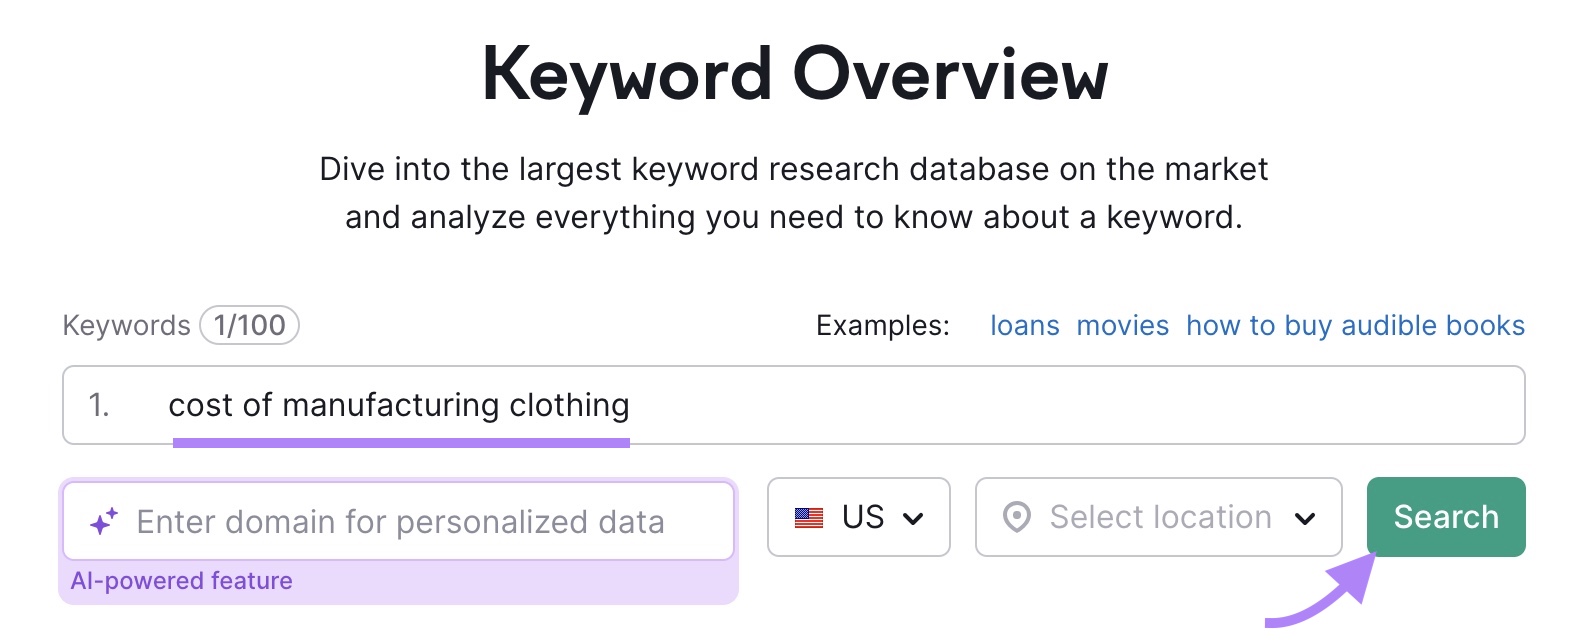 Keyword Overview tool-start with the term "cost of manufacturing clothing" entered and the "Search" button clicked.